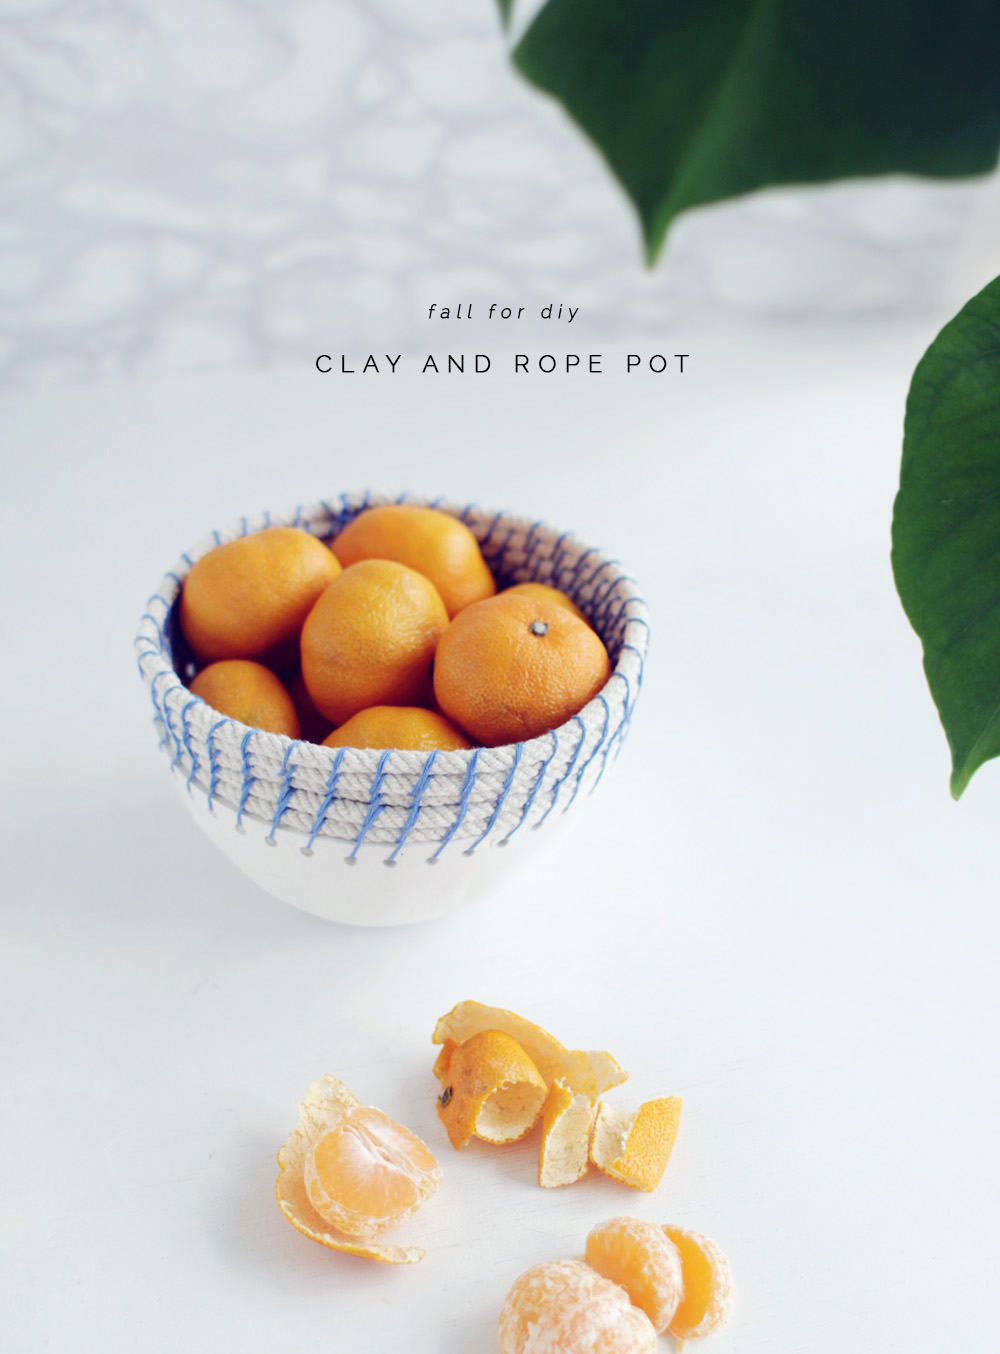 Fall For DIY Clay and Rope Pot tutorial